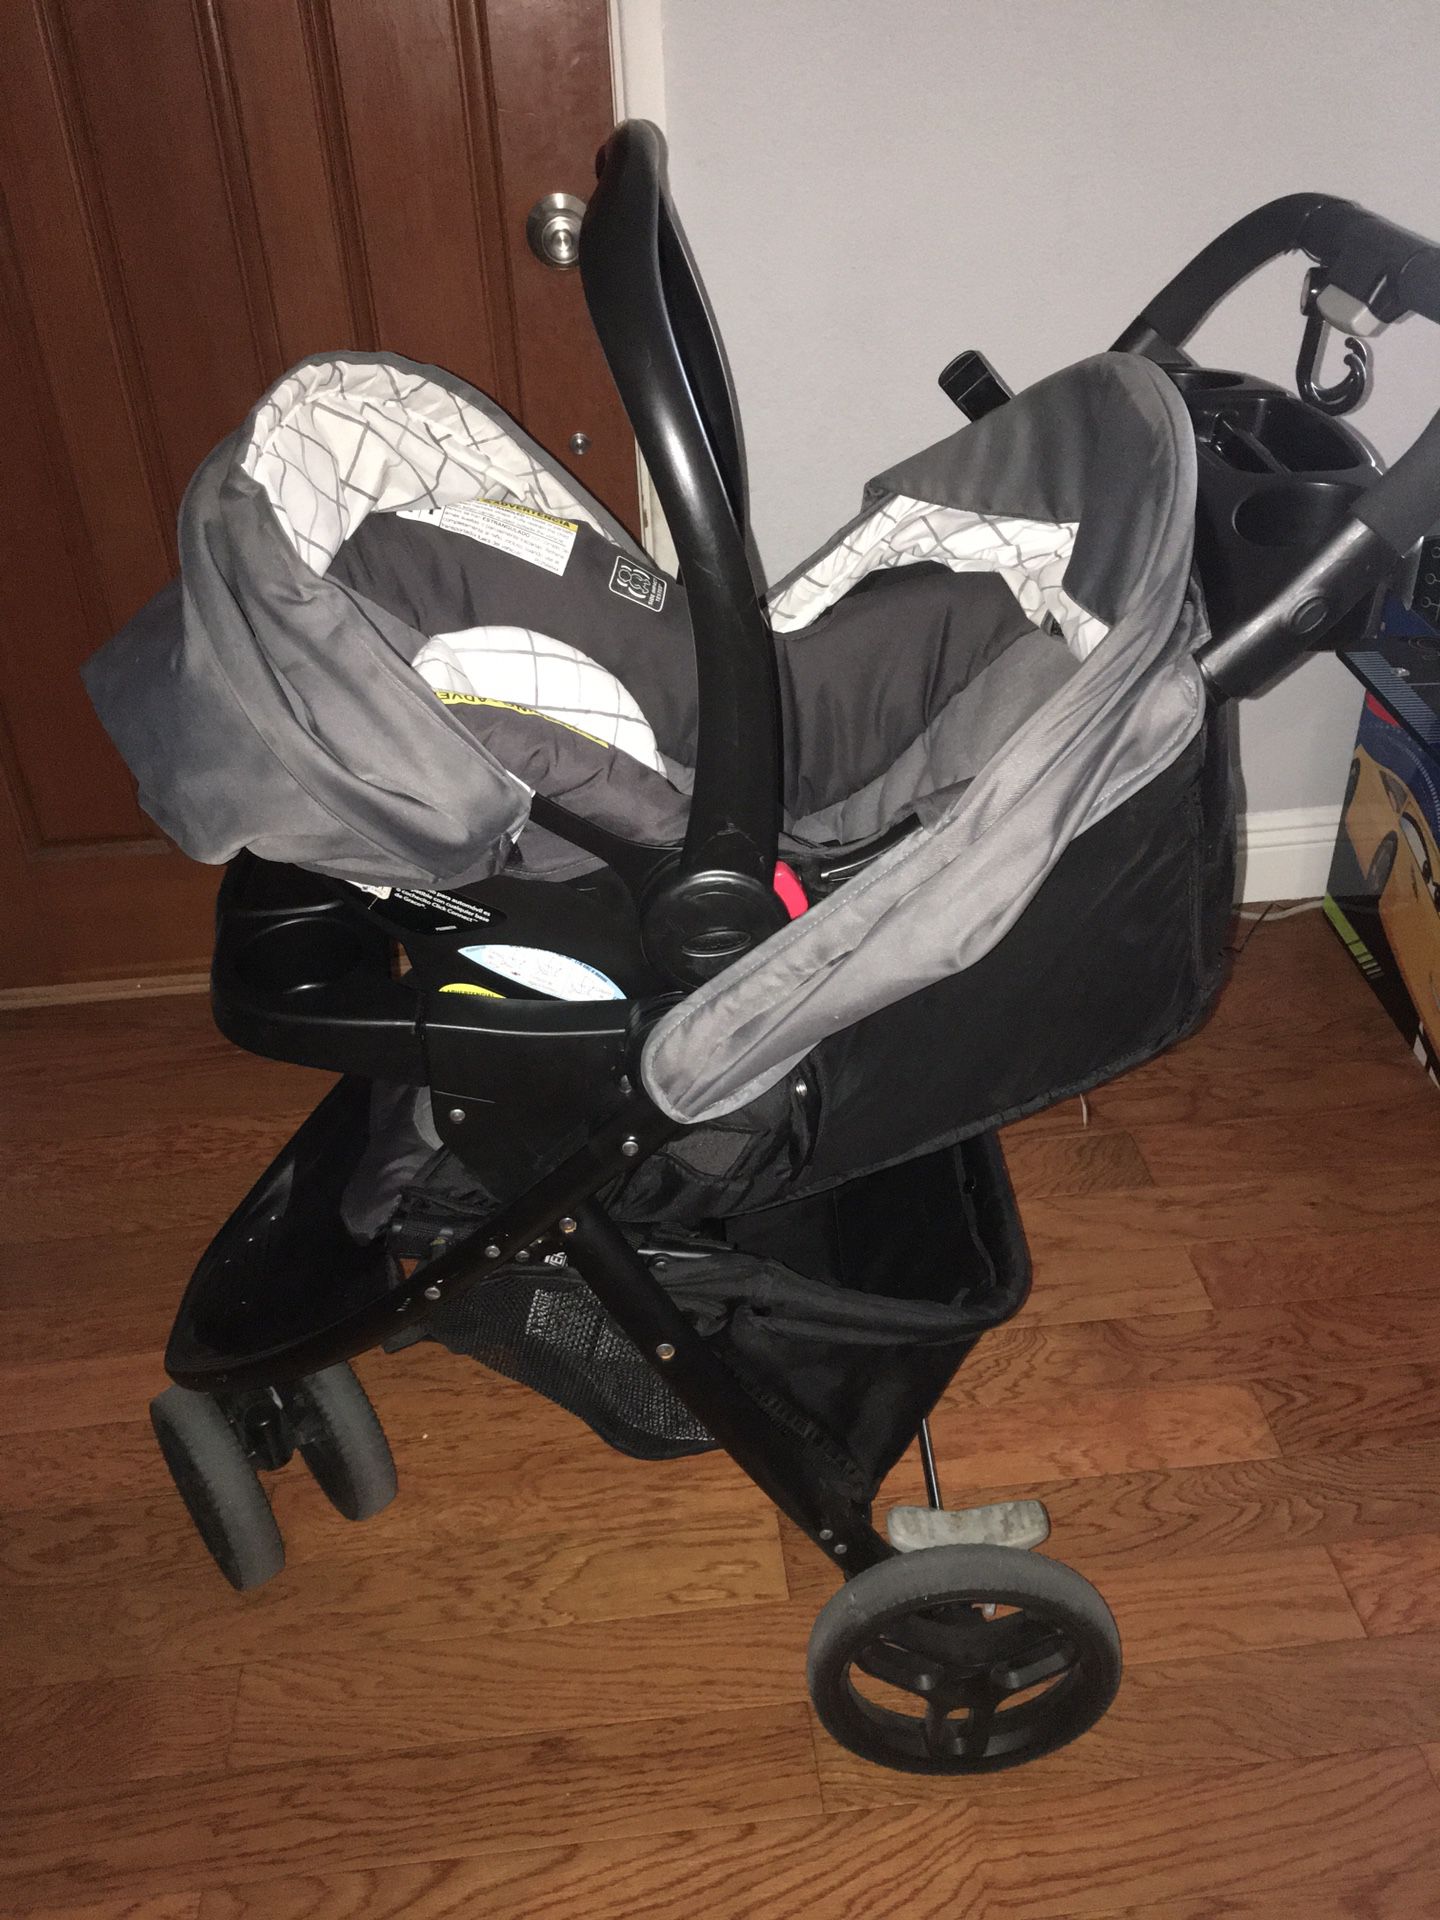 Graco travel system - Car seat, Stroller and Base